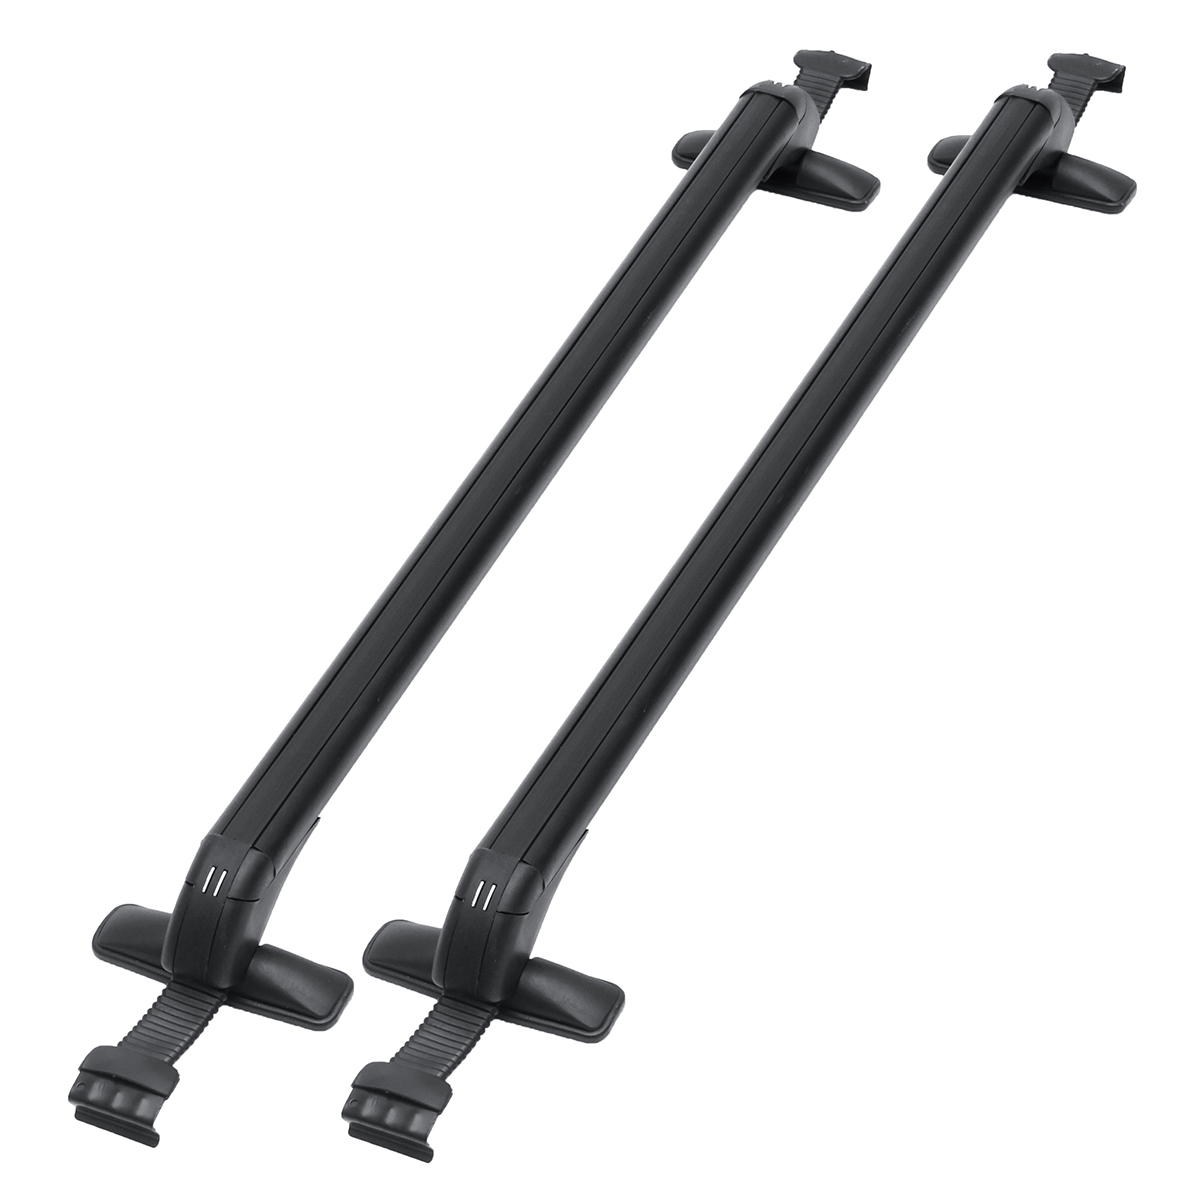 2pcs 100cm Car Roof Rack Cross Bars Anti-theft Lockable Roof Racks Luggage Carrier with Rubber Gasket For 4DR Car Sedans SUVs